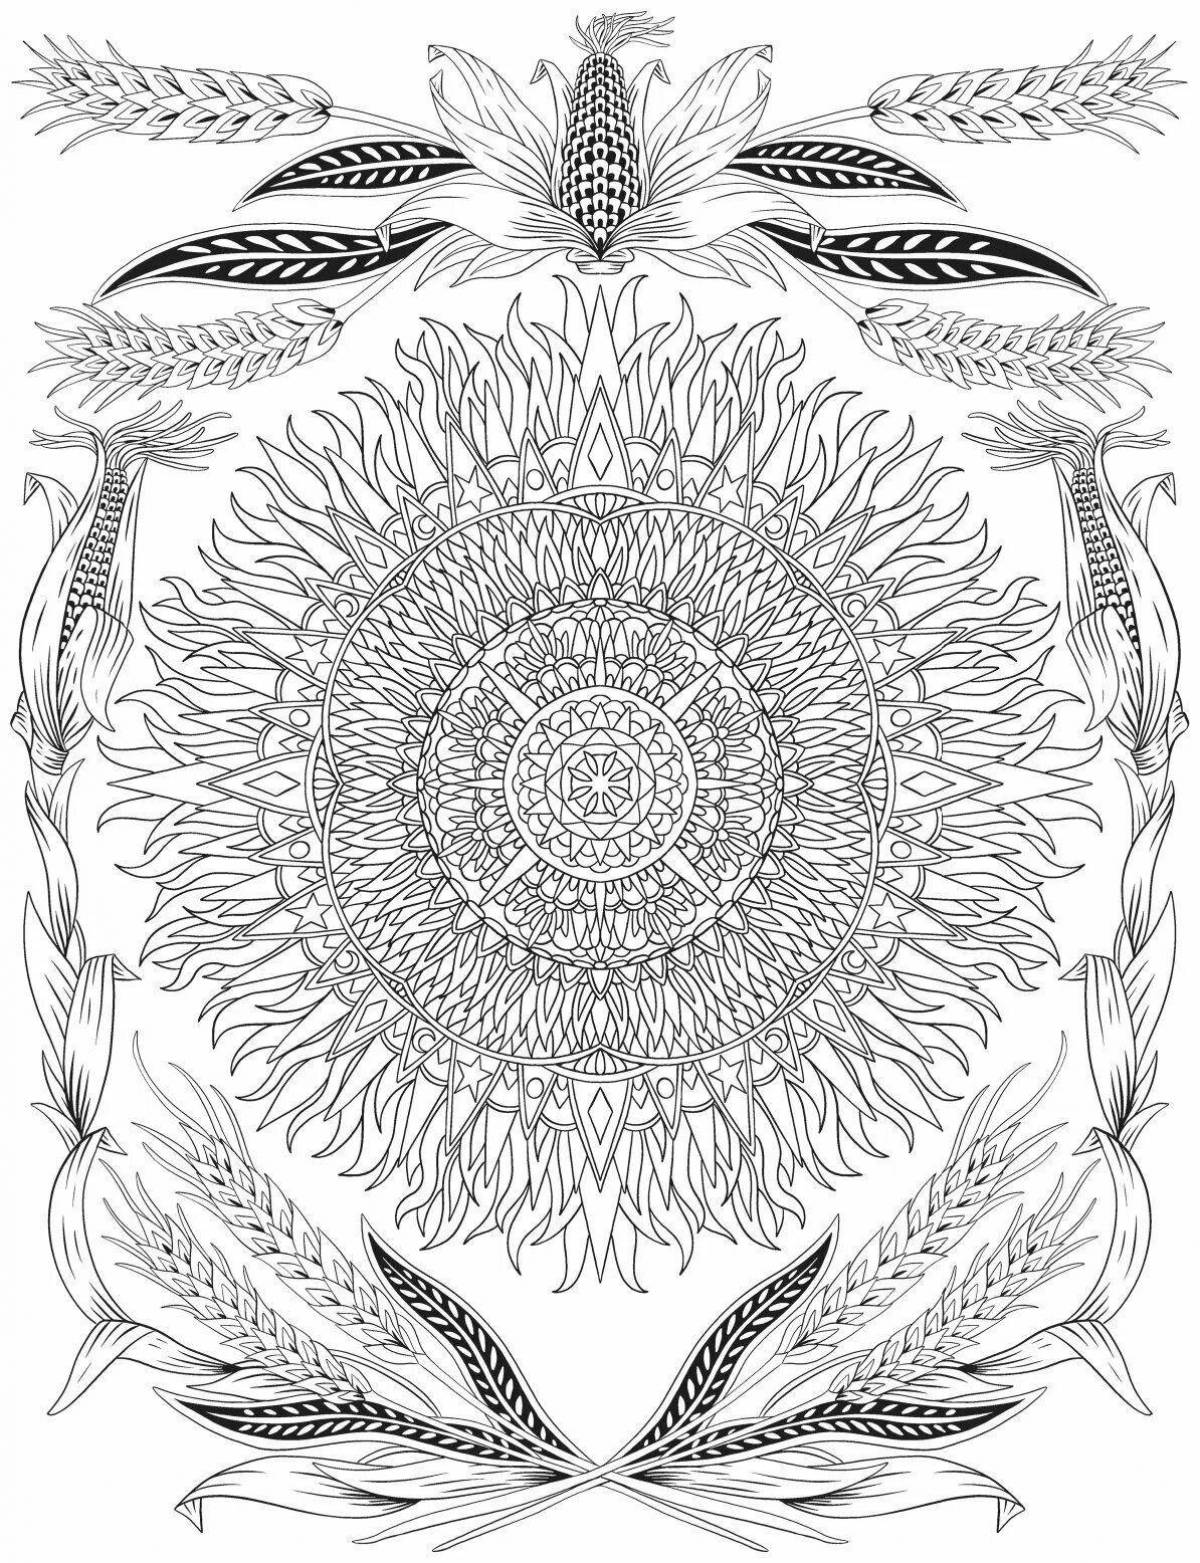 Beautiful inside magic magic coloring page by claire scully